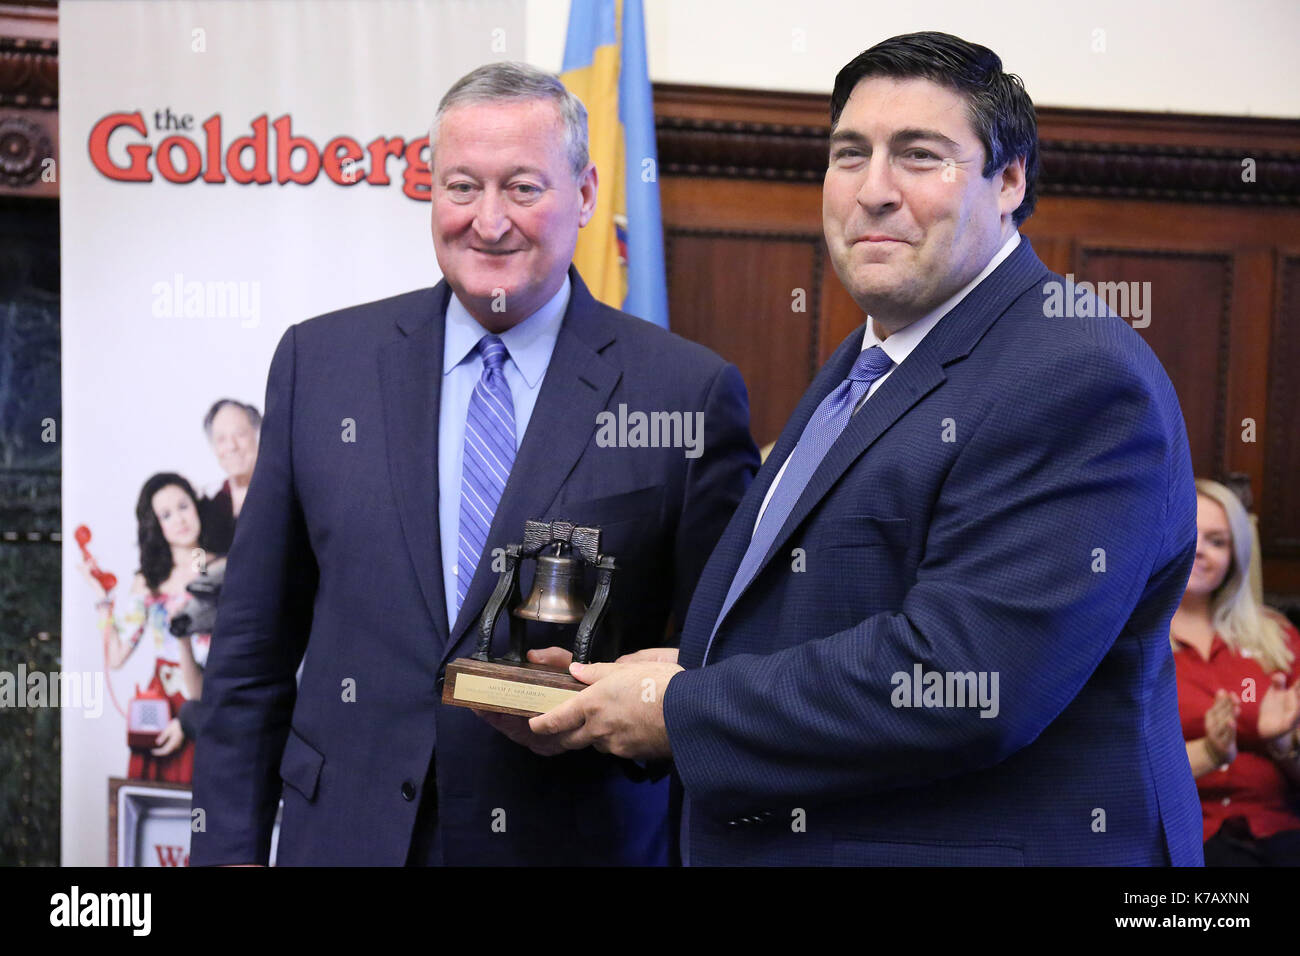 Pjiladelphia, PA, USA. 15th Sep, 2017. Producer Adam F Goldberg pictured with Philadelphia Mayor Jim Kenney as he receives a Liberty Bell for the Goldbergs in City Hall in Philadelphia, Pa on September 15, 2017 Credit: Star Shooter/Media Punch/Alamy Live News Stock Photo